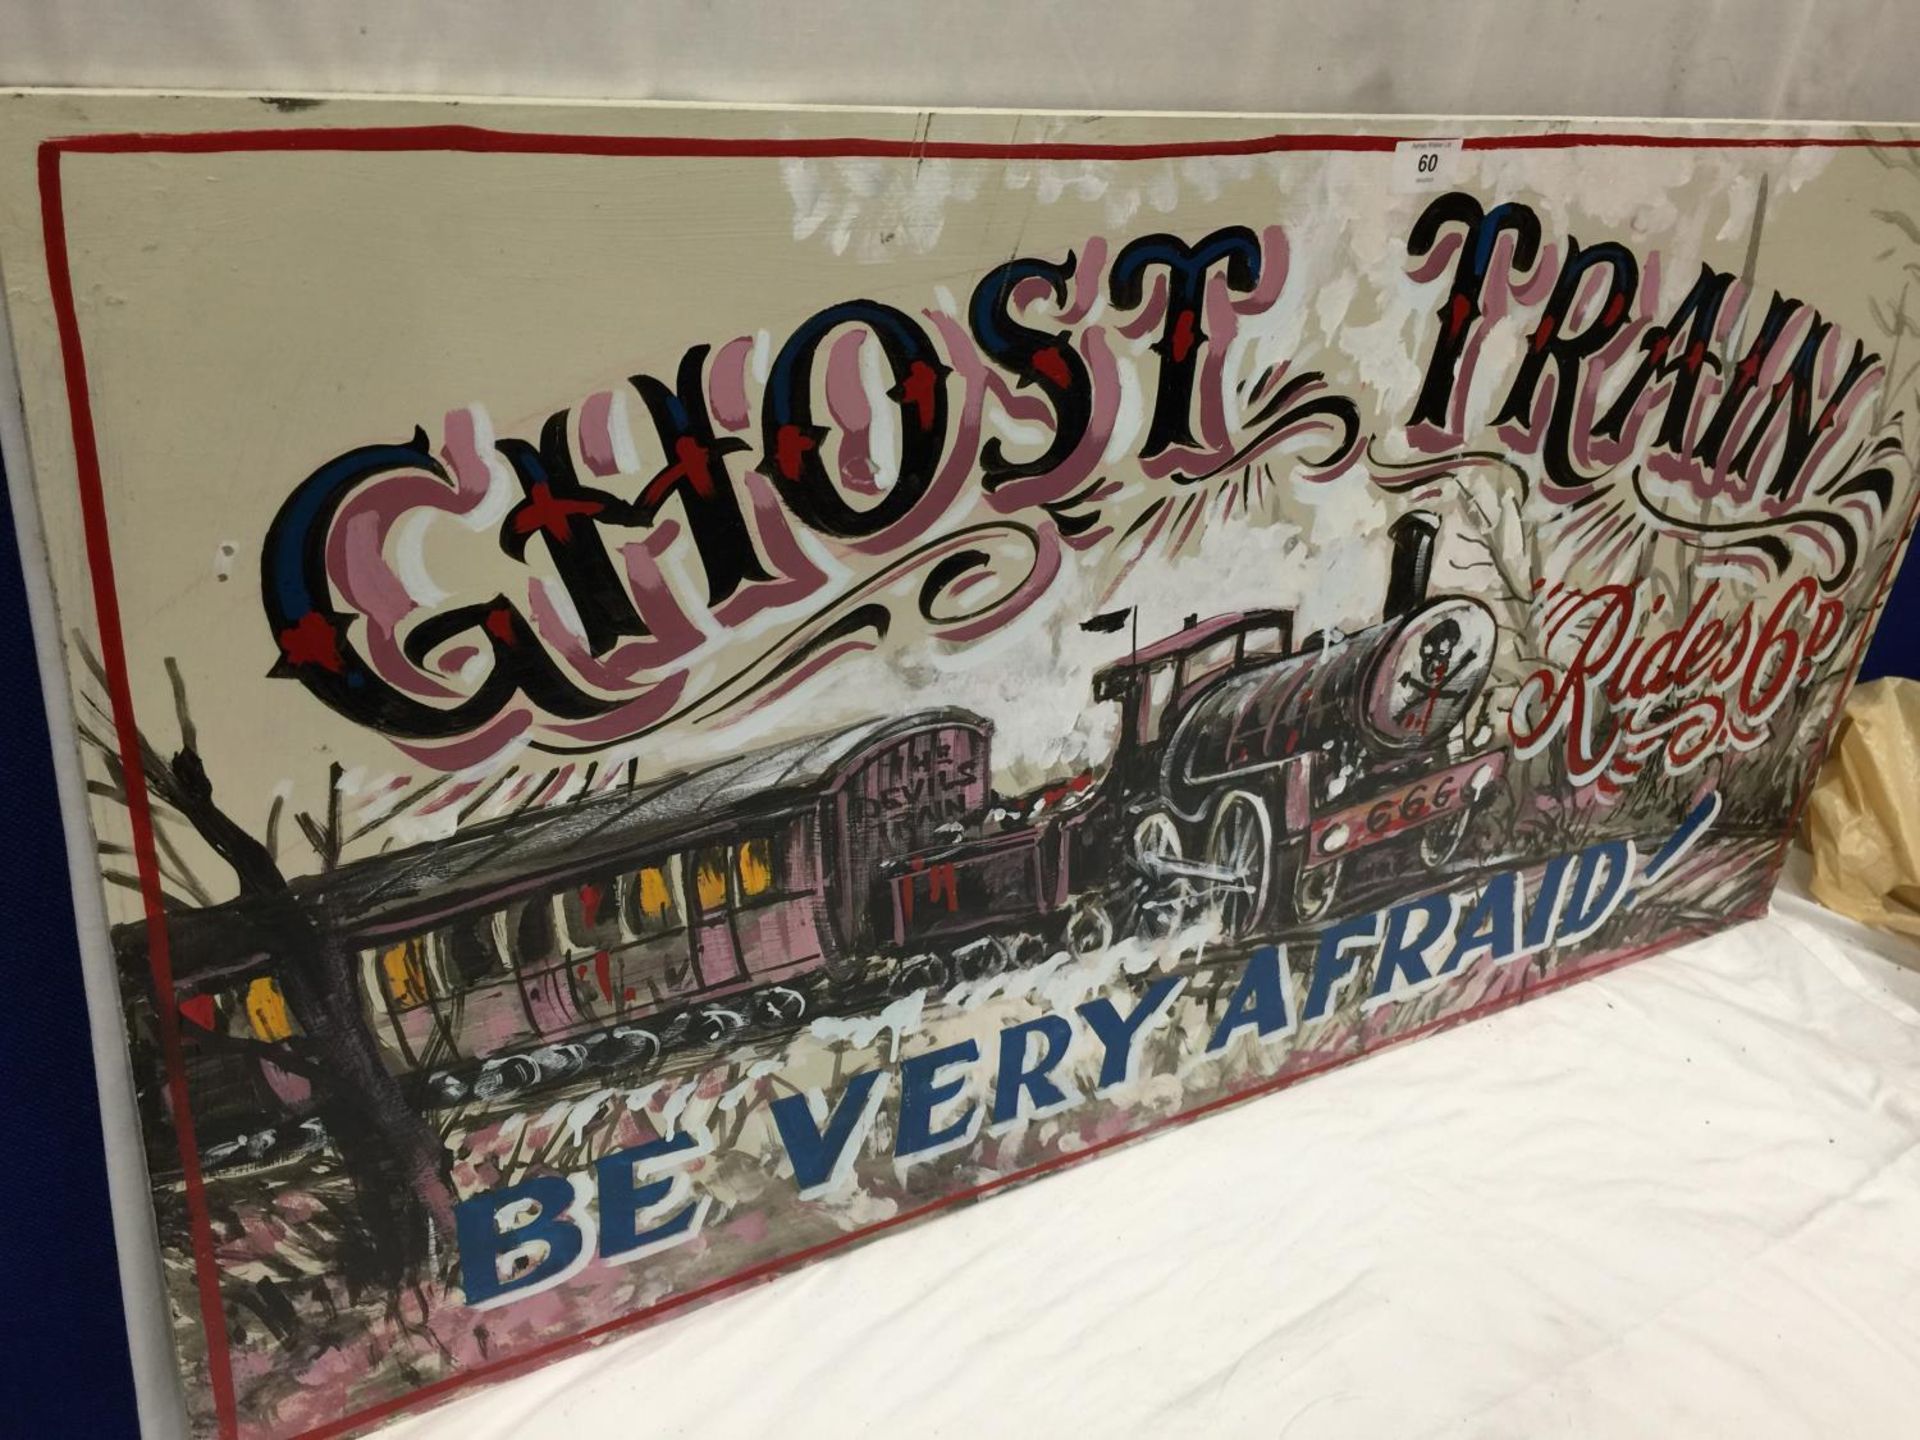 A LARGE WOODEN GHOST TRAIN FAIRGROUND SIGN 104CM X 54CM - Image 2 of 4